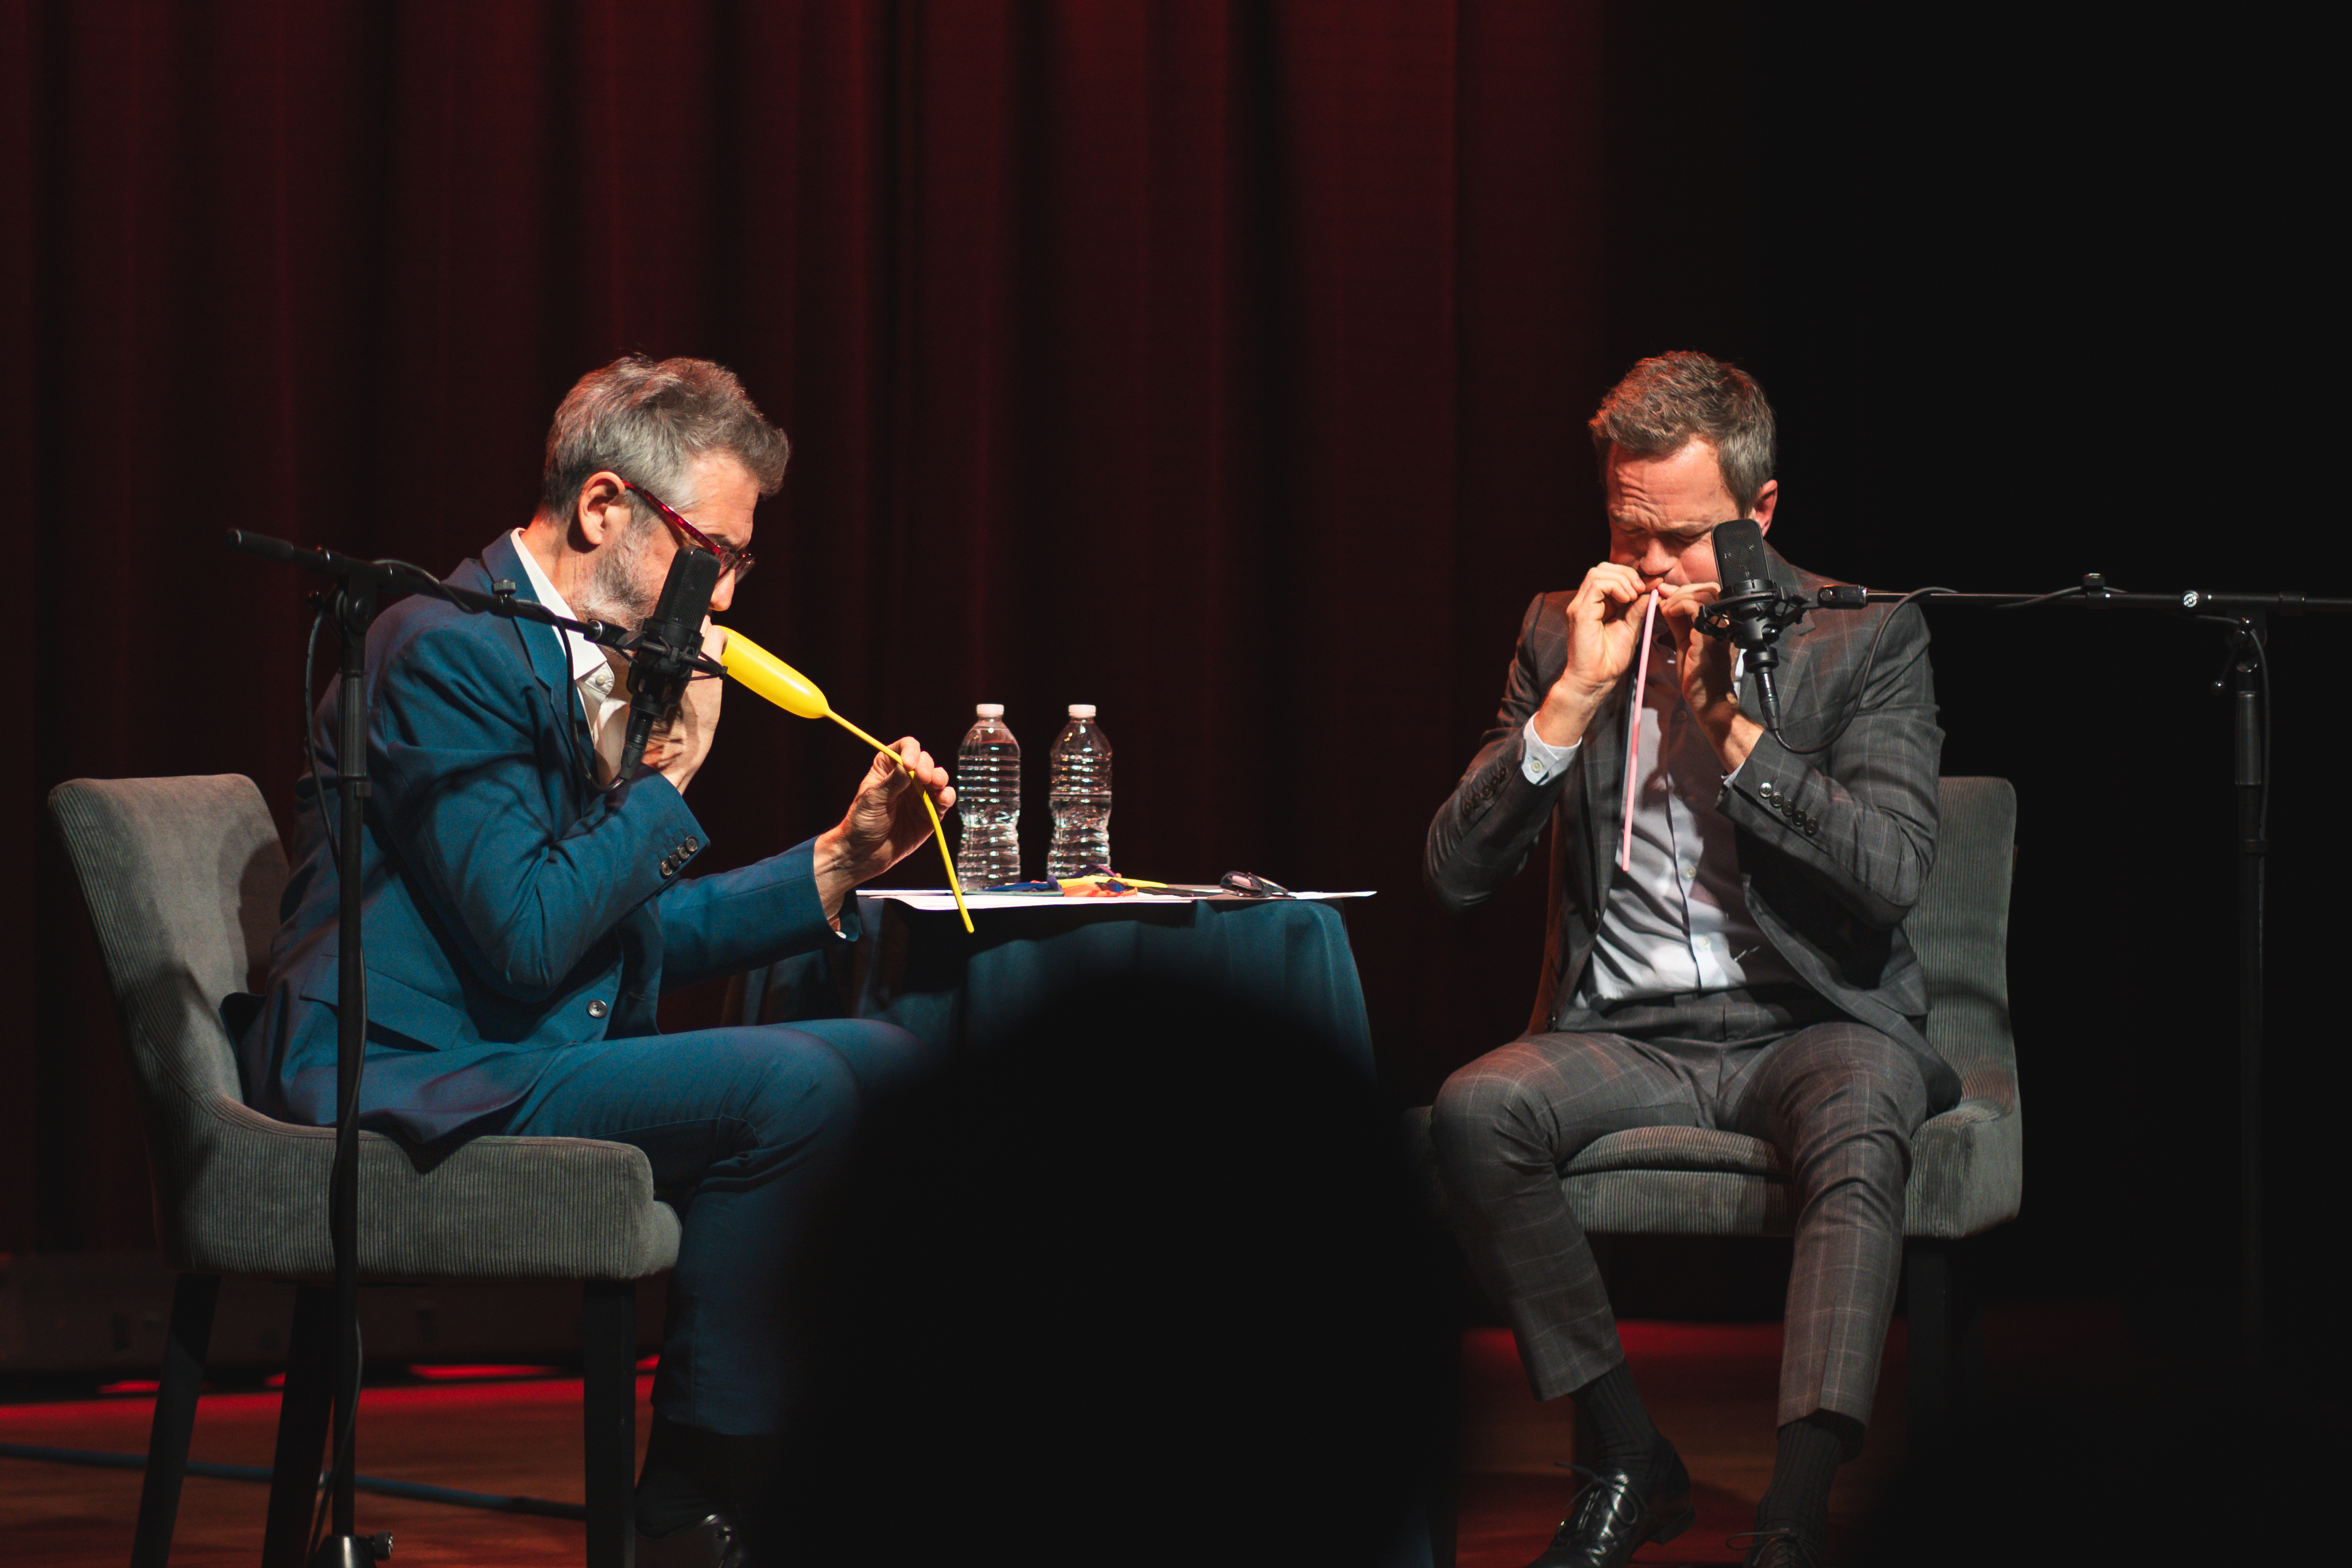 Neil Patrick Harris and Ira Glass blowing up balloon animals on stage